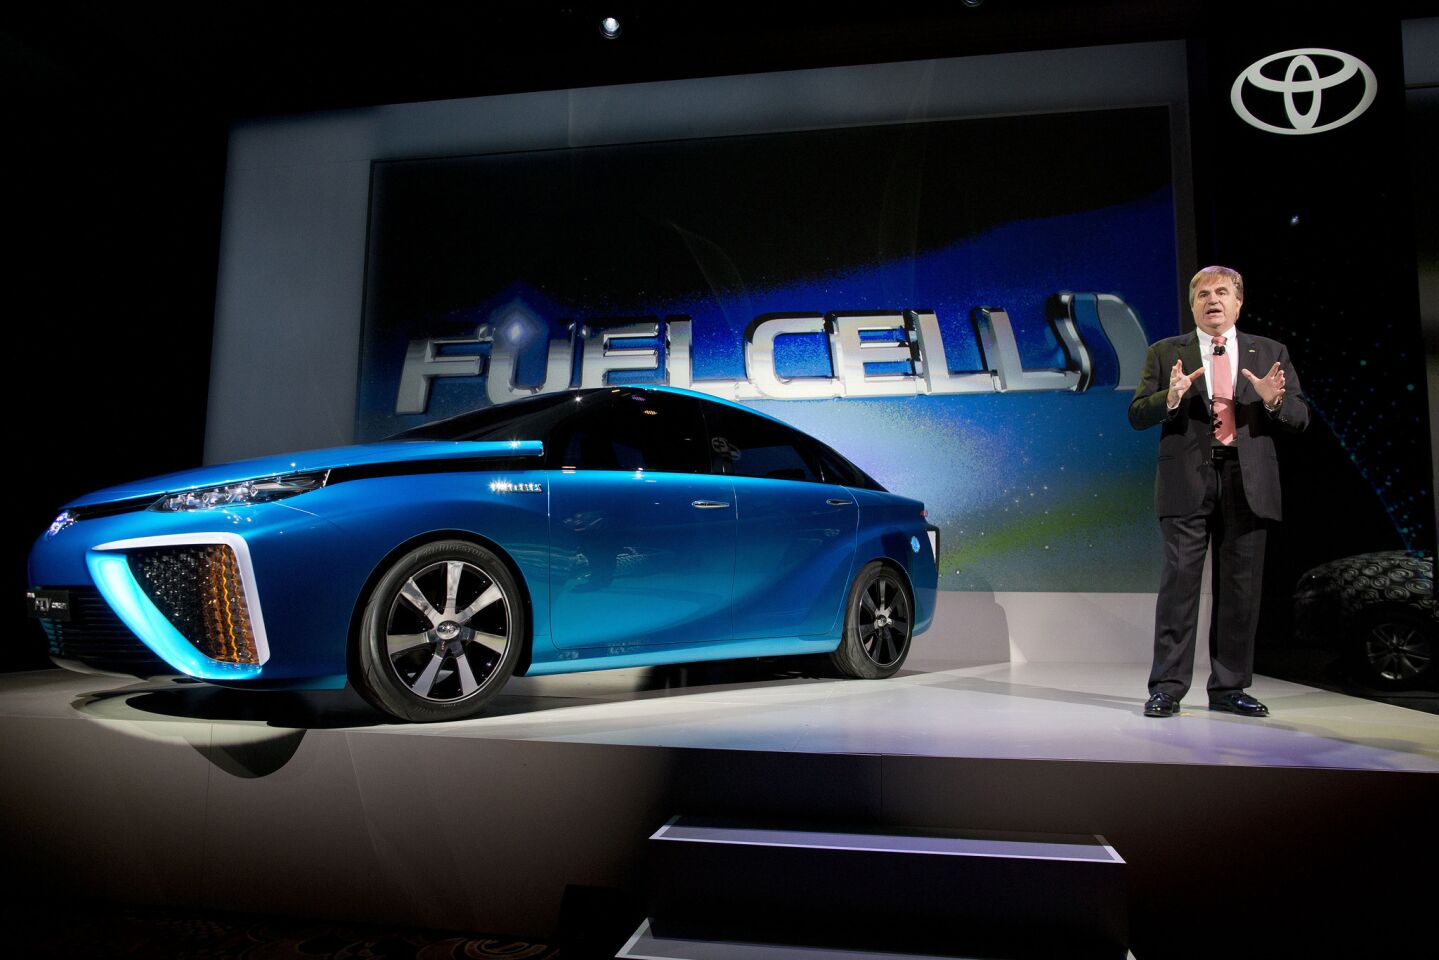 Toyota vice president and general manager Bob Carter talks about Toyota's FCV hydrogen electric concept car during the International Consumer Electronics Show in Las Vegas. Carter announced the car would be be available to consumers in 2015.